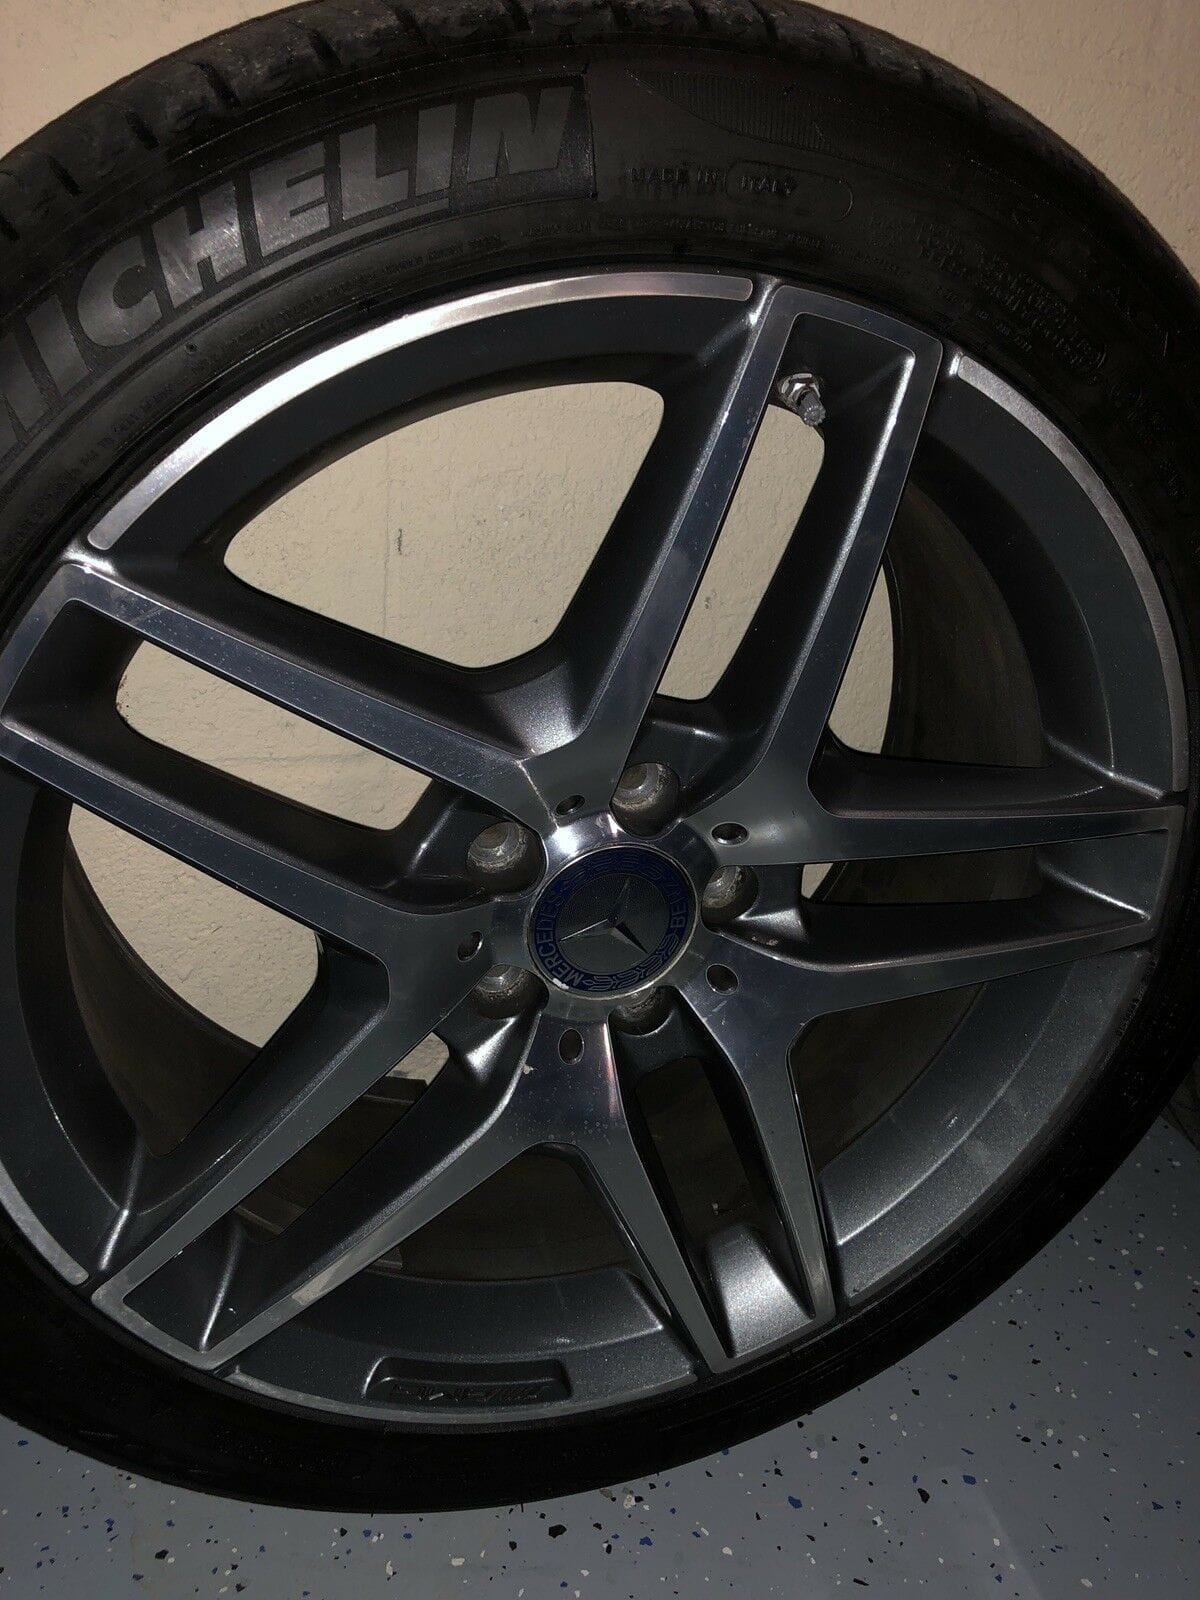 Wheels and Tires/Axles - W222 19" AMG WHEELS with Michelin Tires - A2224010100 - Used - 2014 to 2017 Mercedes-Benz S550 - 2018 to 2019 Mercedes-Benz S560 - 2018 to 2019 Mercedes-Benz S450 - Orlando, FL 32808, United States